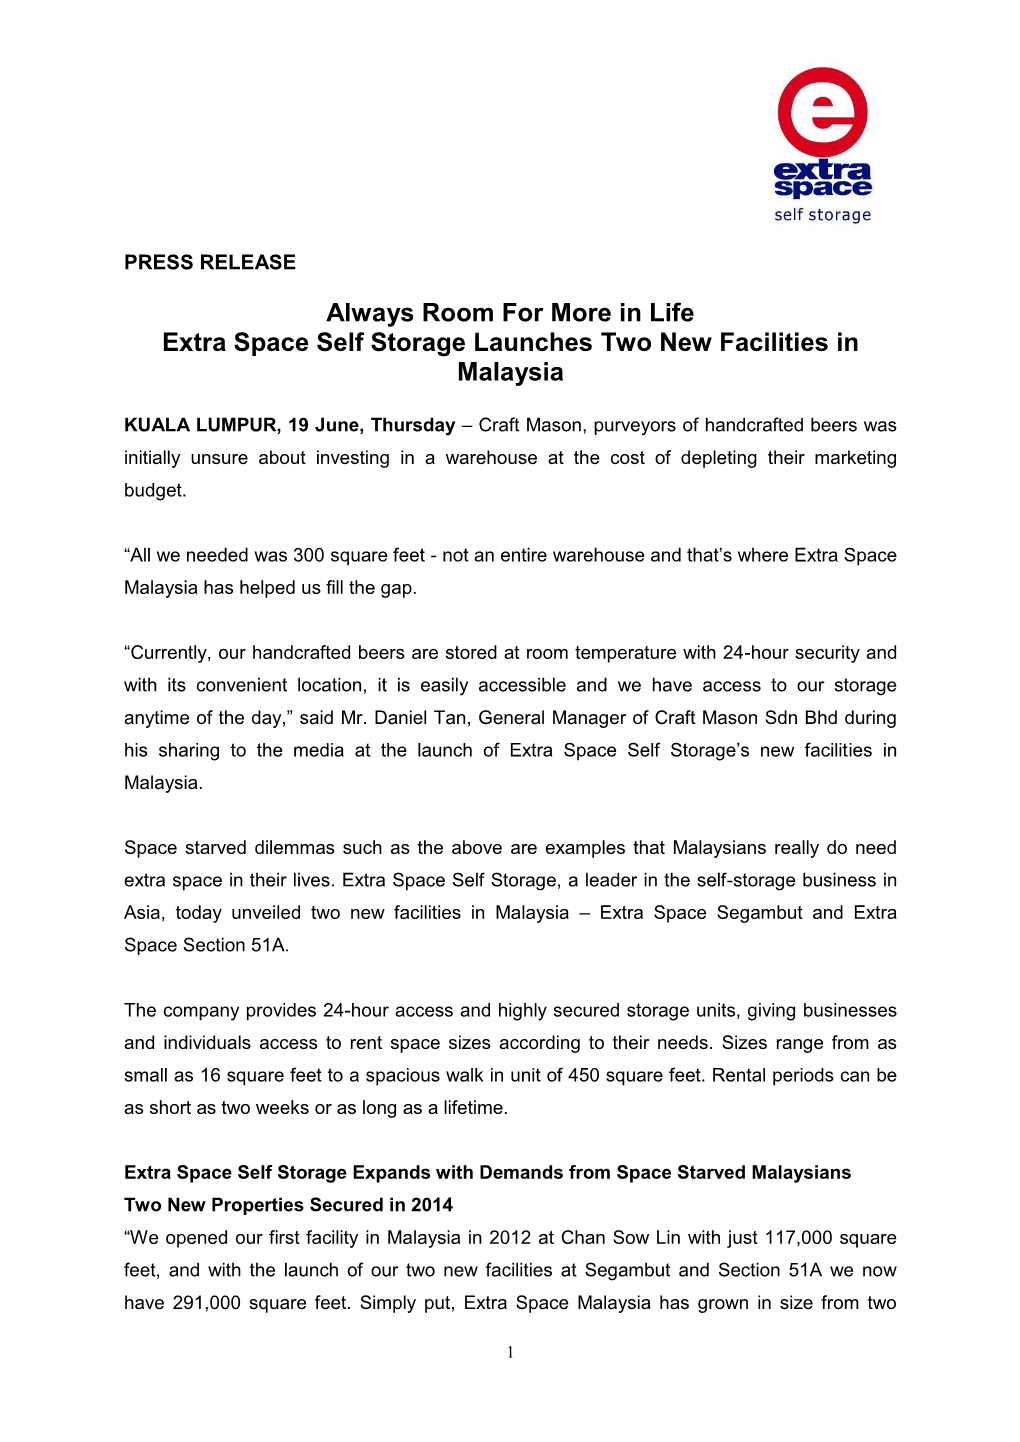 Always Room for More in Life Extra Space Self Storage Launches Two New Facilities in Malaysia